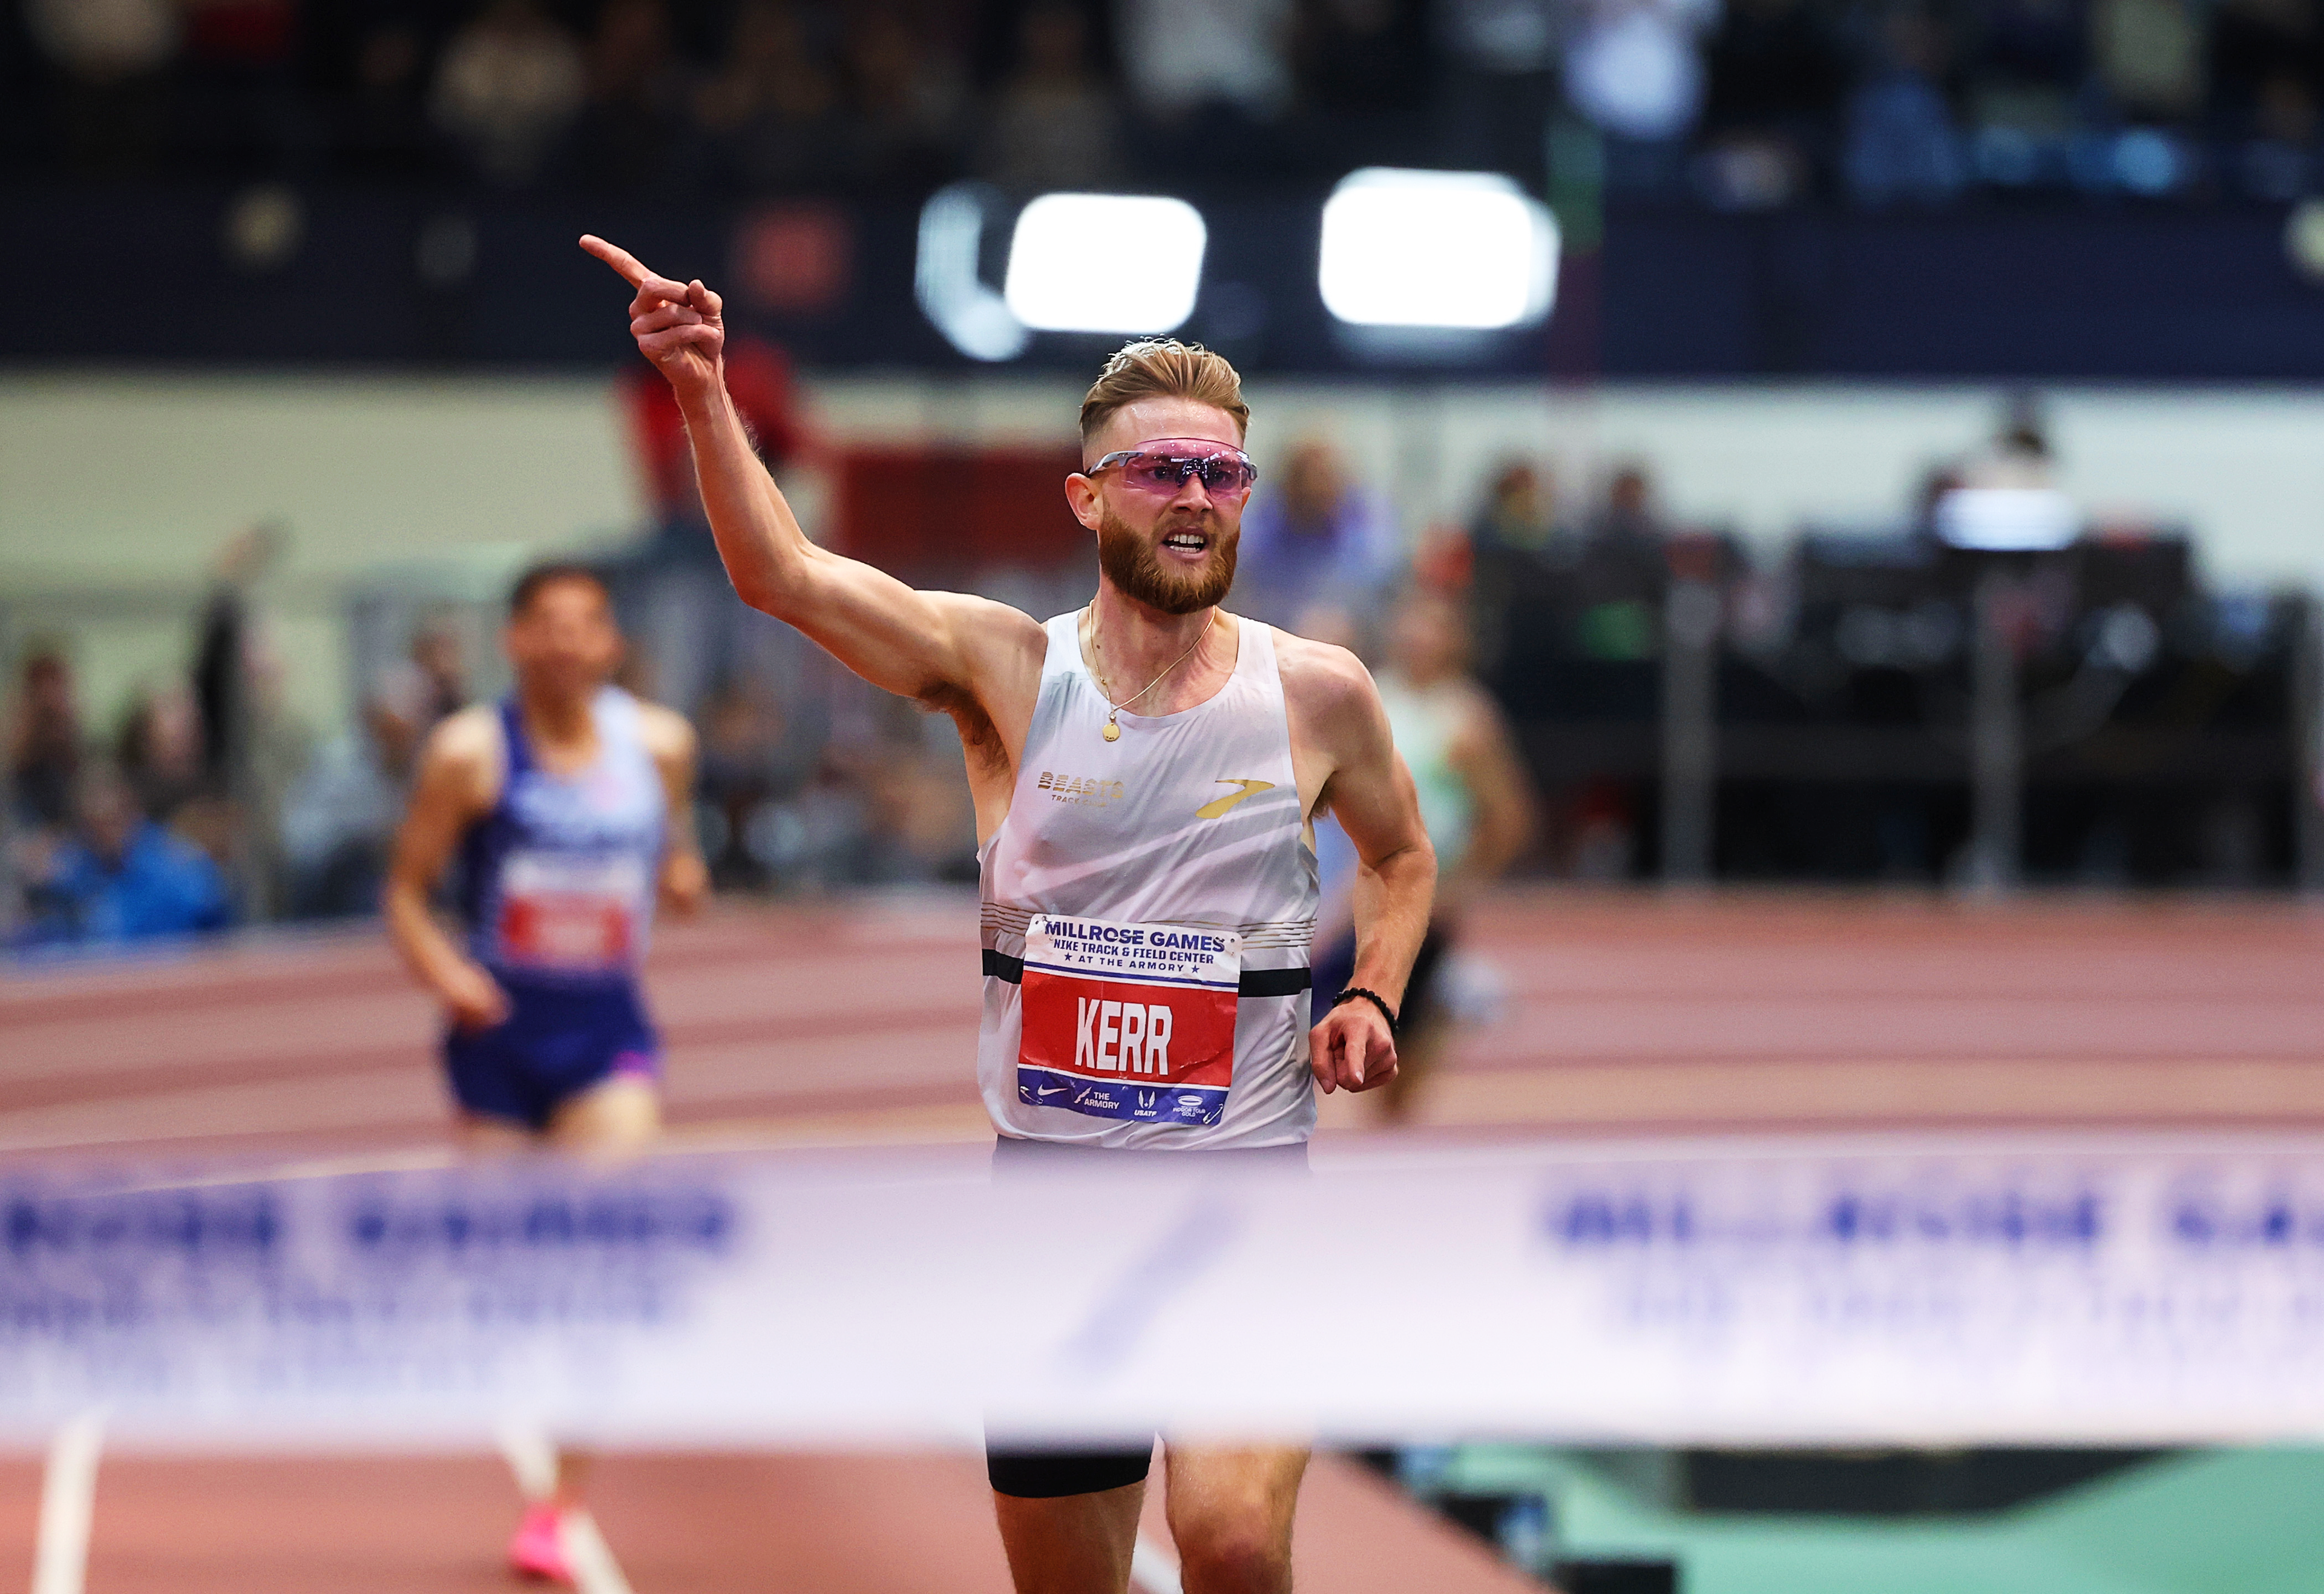 Josh Kerr celebrates as he prepares to clinch the indoor two-mile world record in New York on 11 February